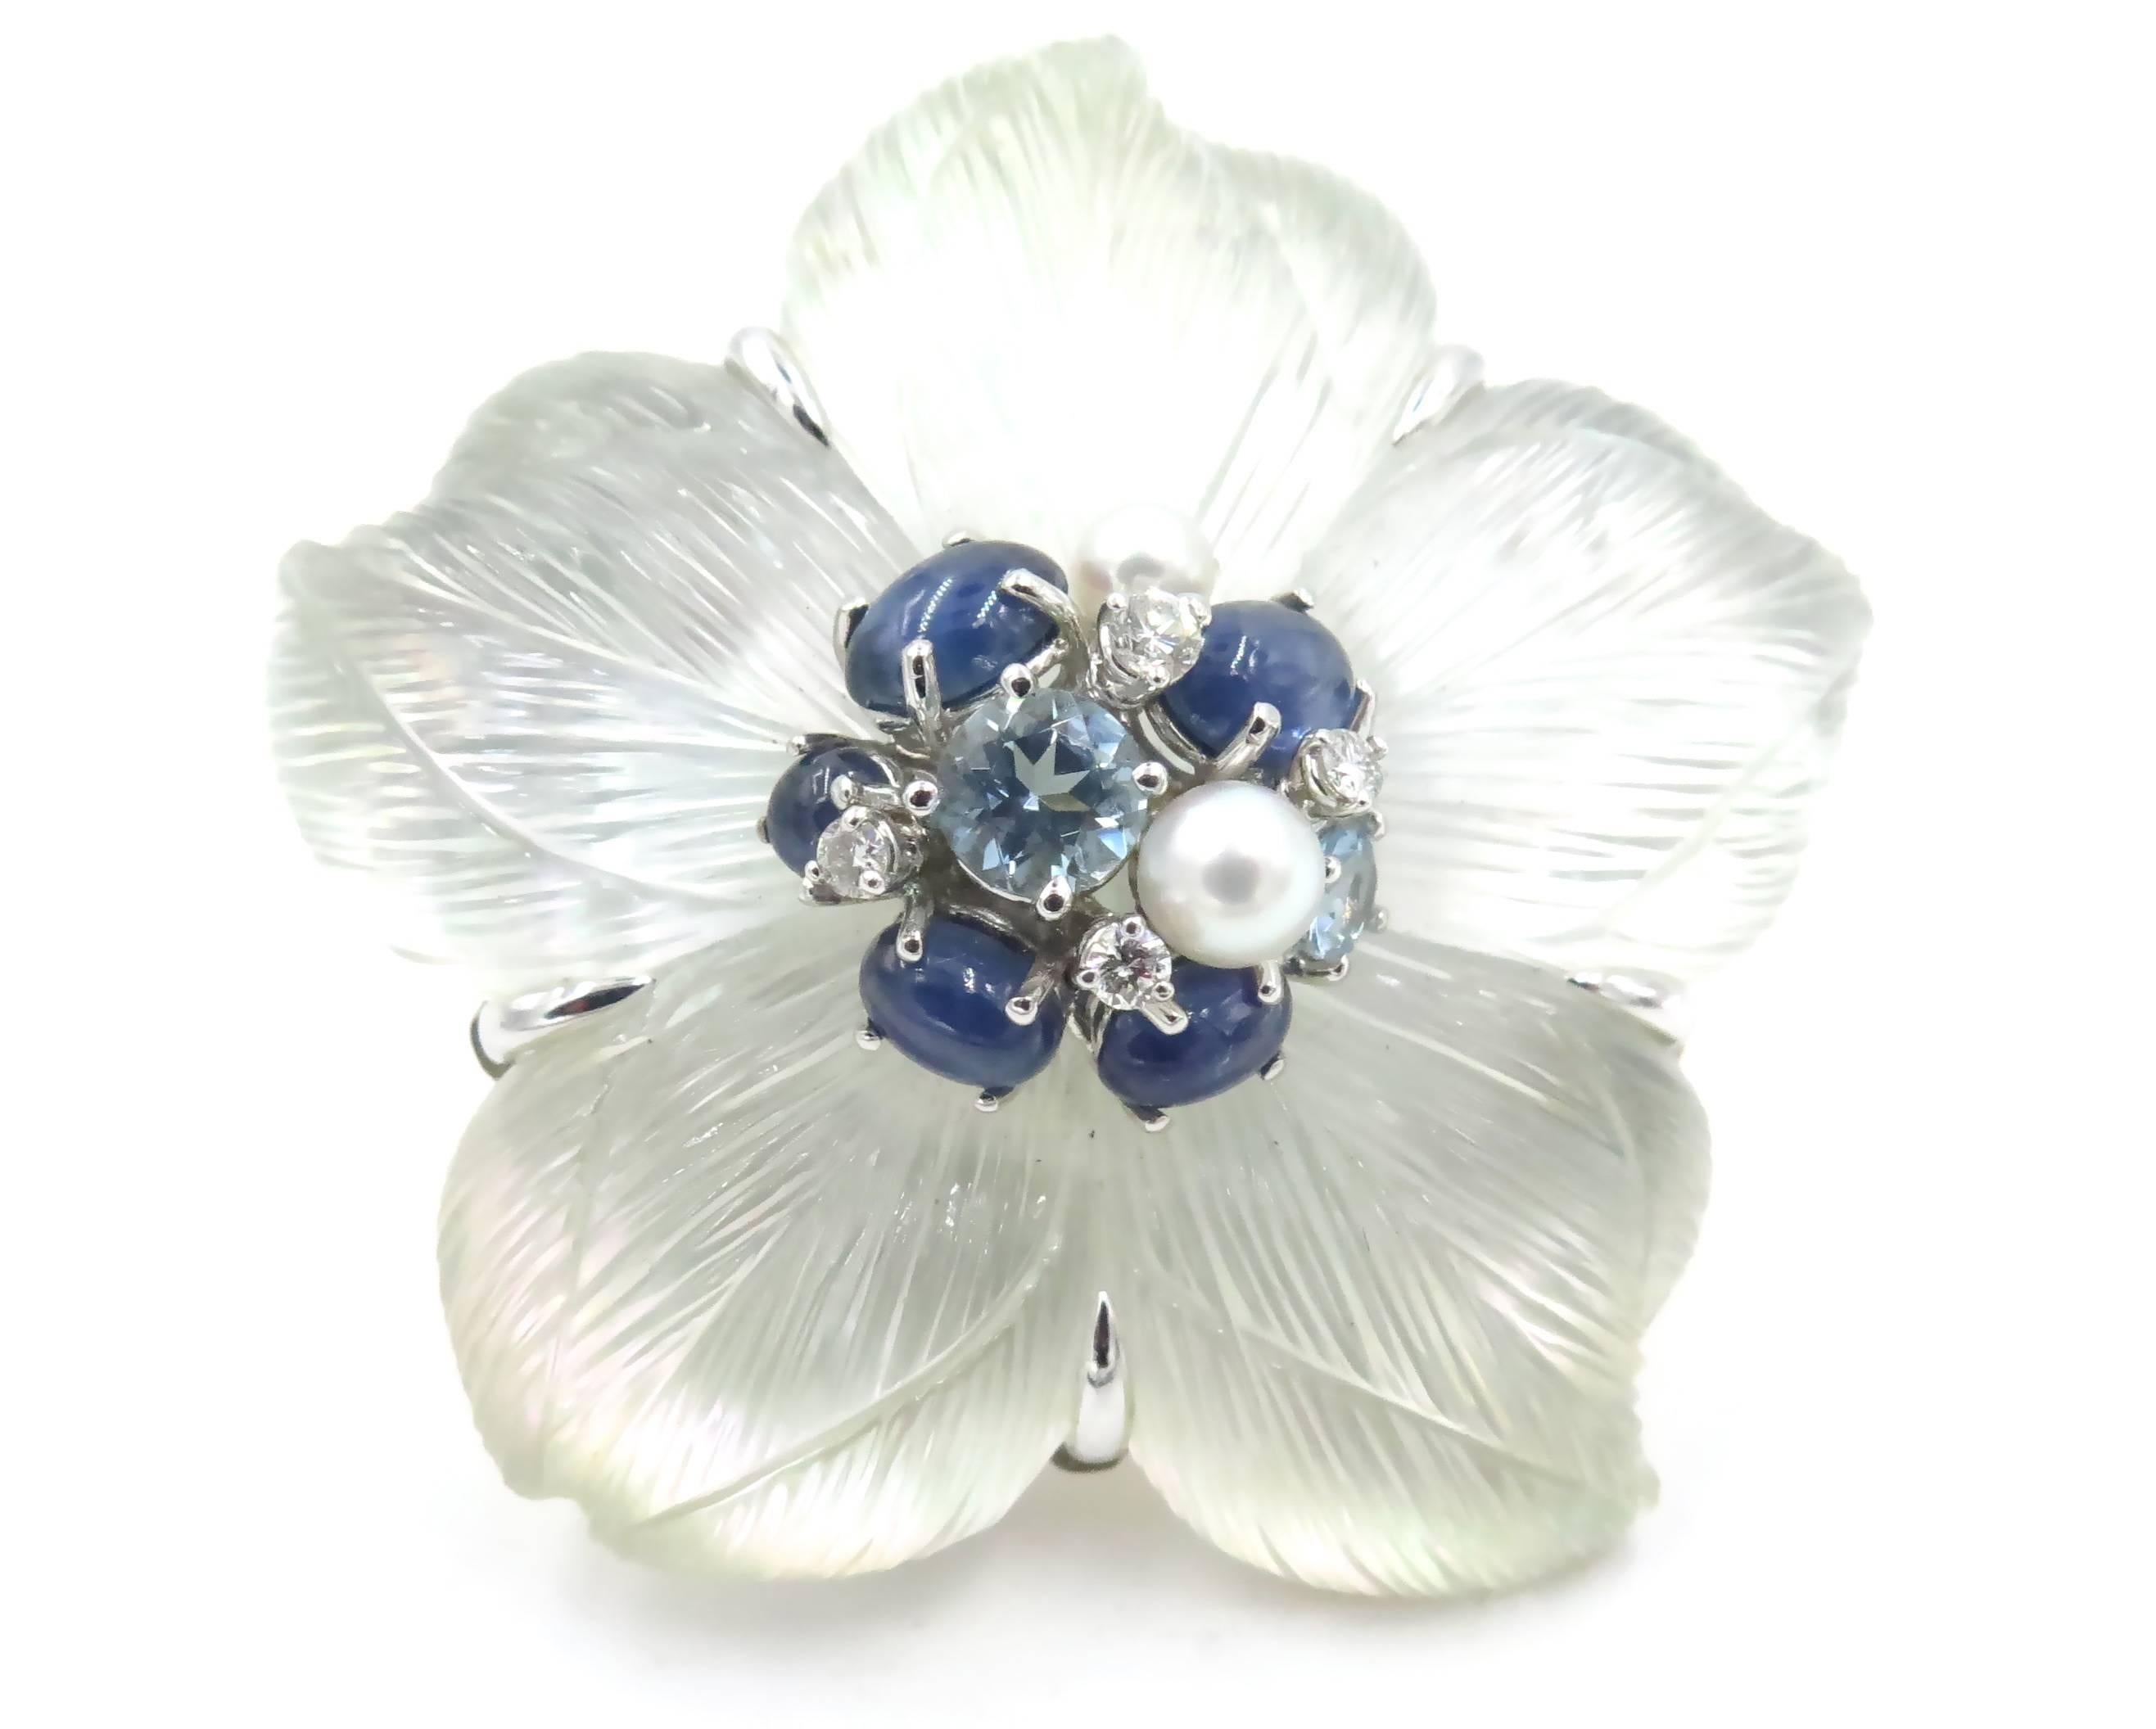 An 18 karat white gold, carved rock crystal, mother of pearl, cultured pearl, cabochon sapphire, aquamarine and diamond brooch.  Seaman Schepps.  Circa 1980.  The brooch is known as the Clematis.  Signed on the reverse Seaman Schepps 18214.  Gross